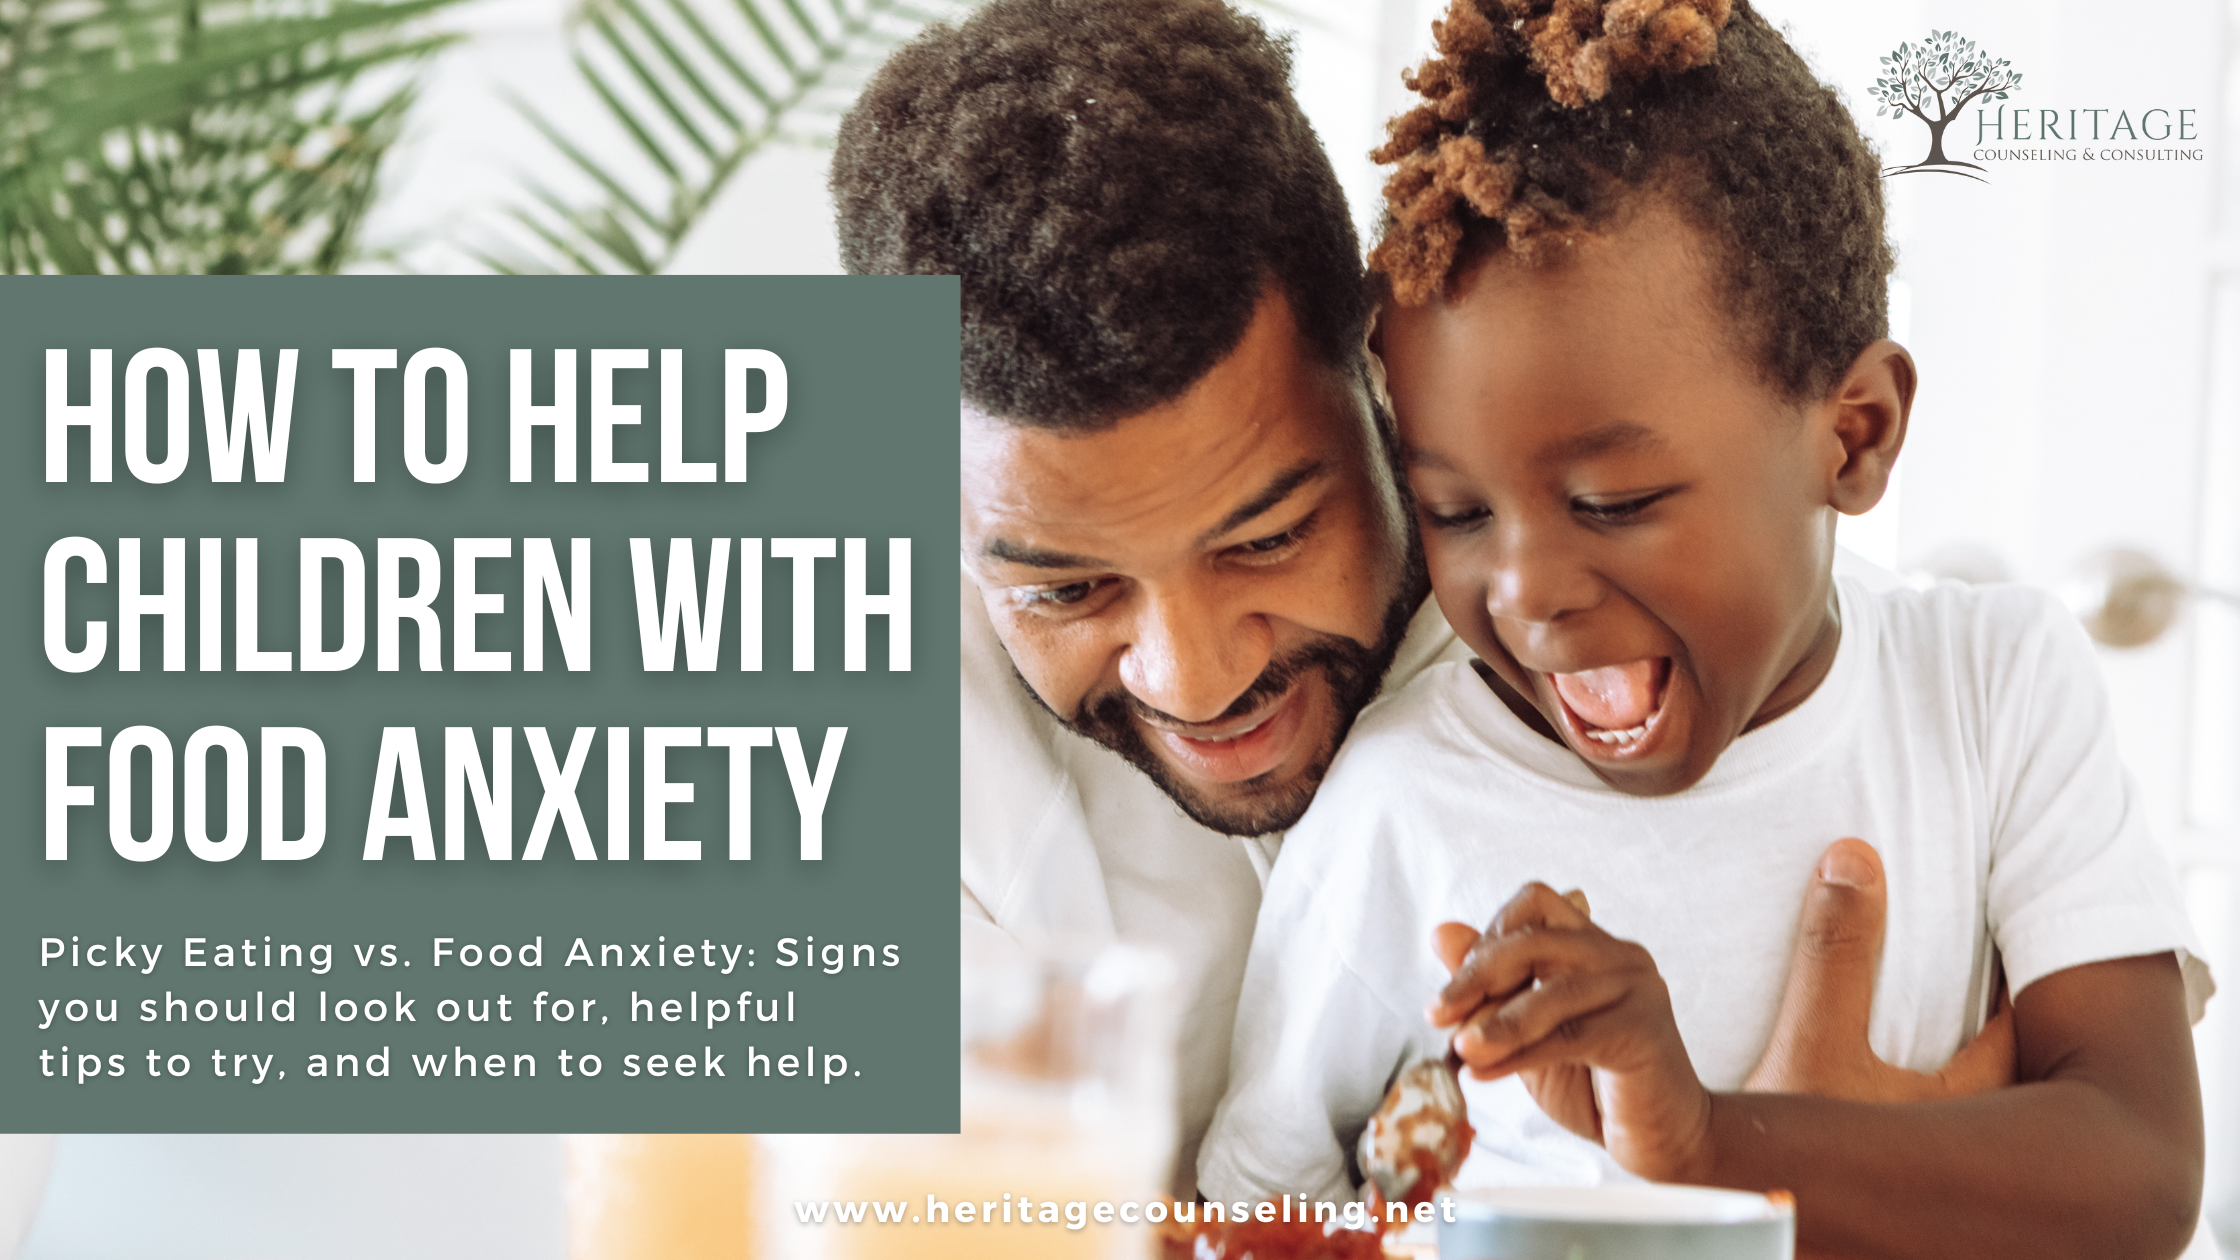 How to Help Children with Food Anxiety